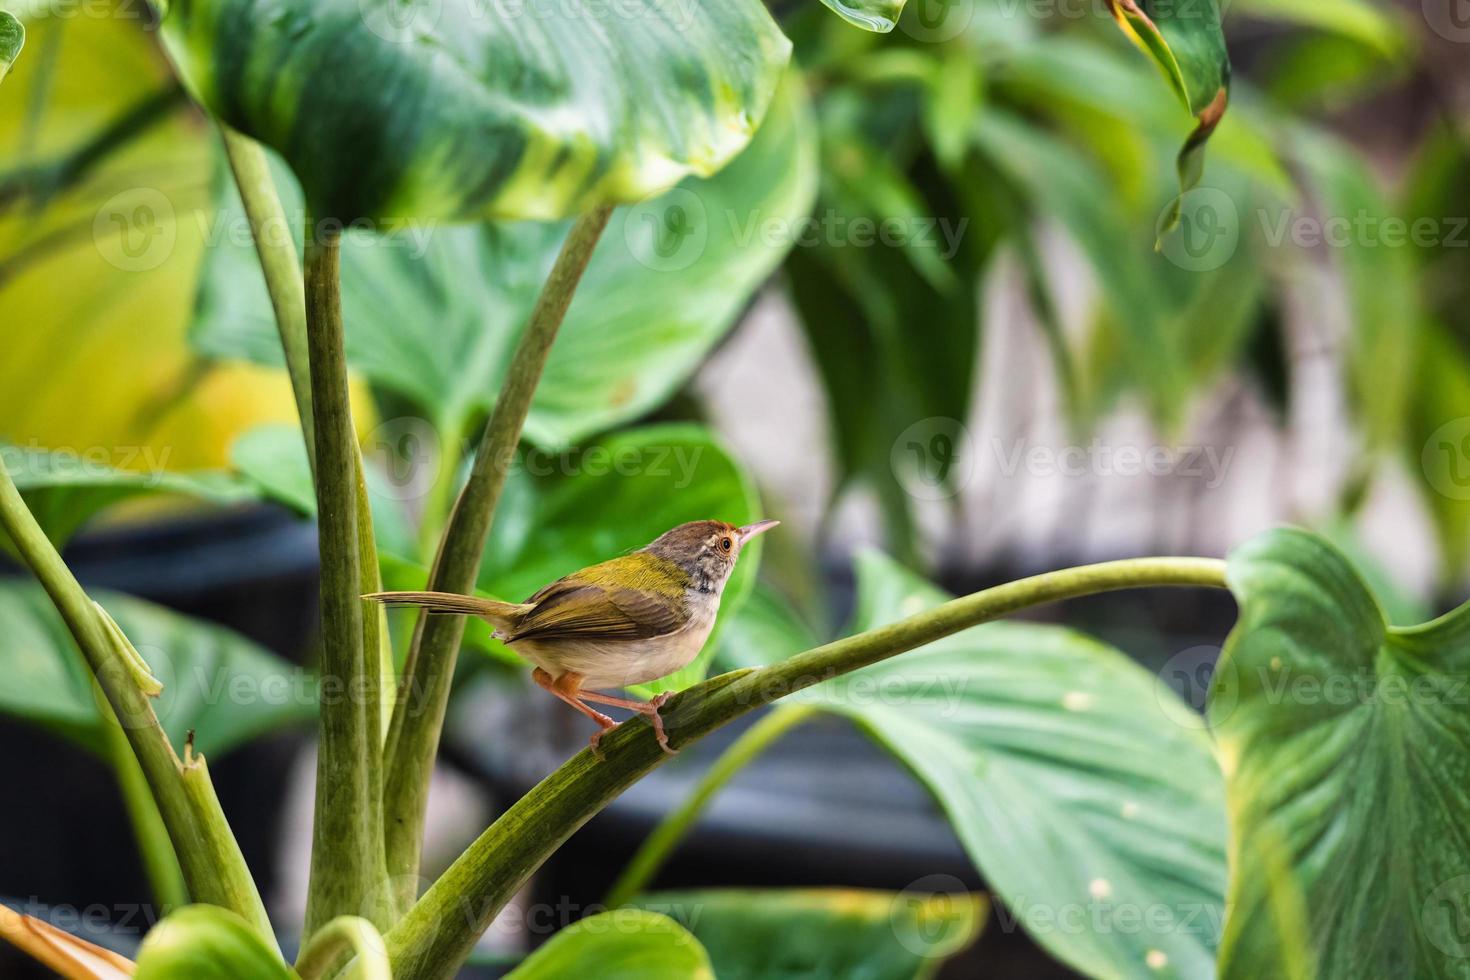 Tiny Common Tailorbird or Orthotomus sutorius perching on branch in the garden photo